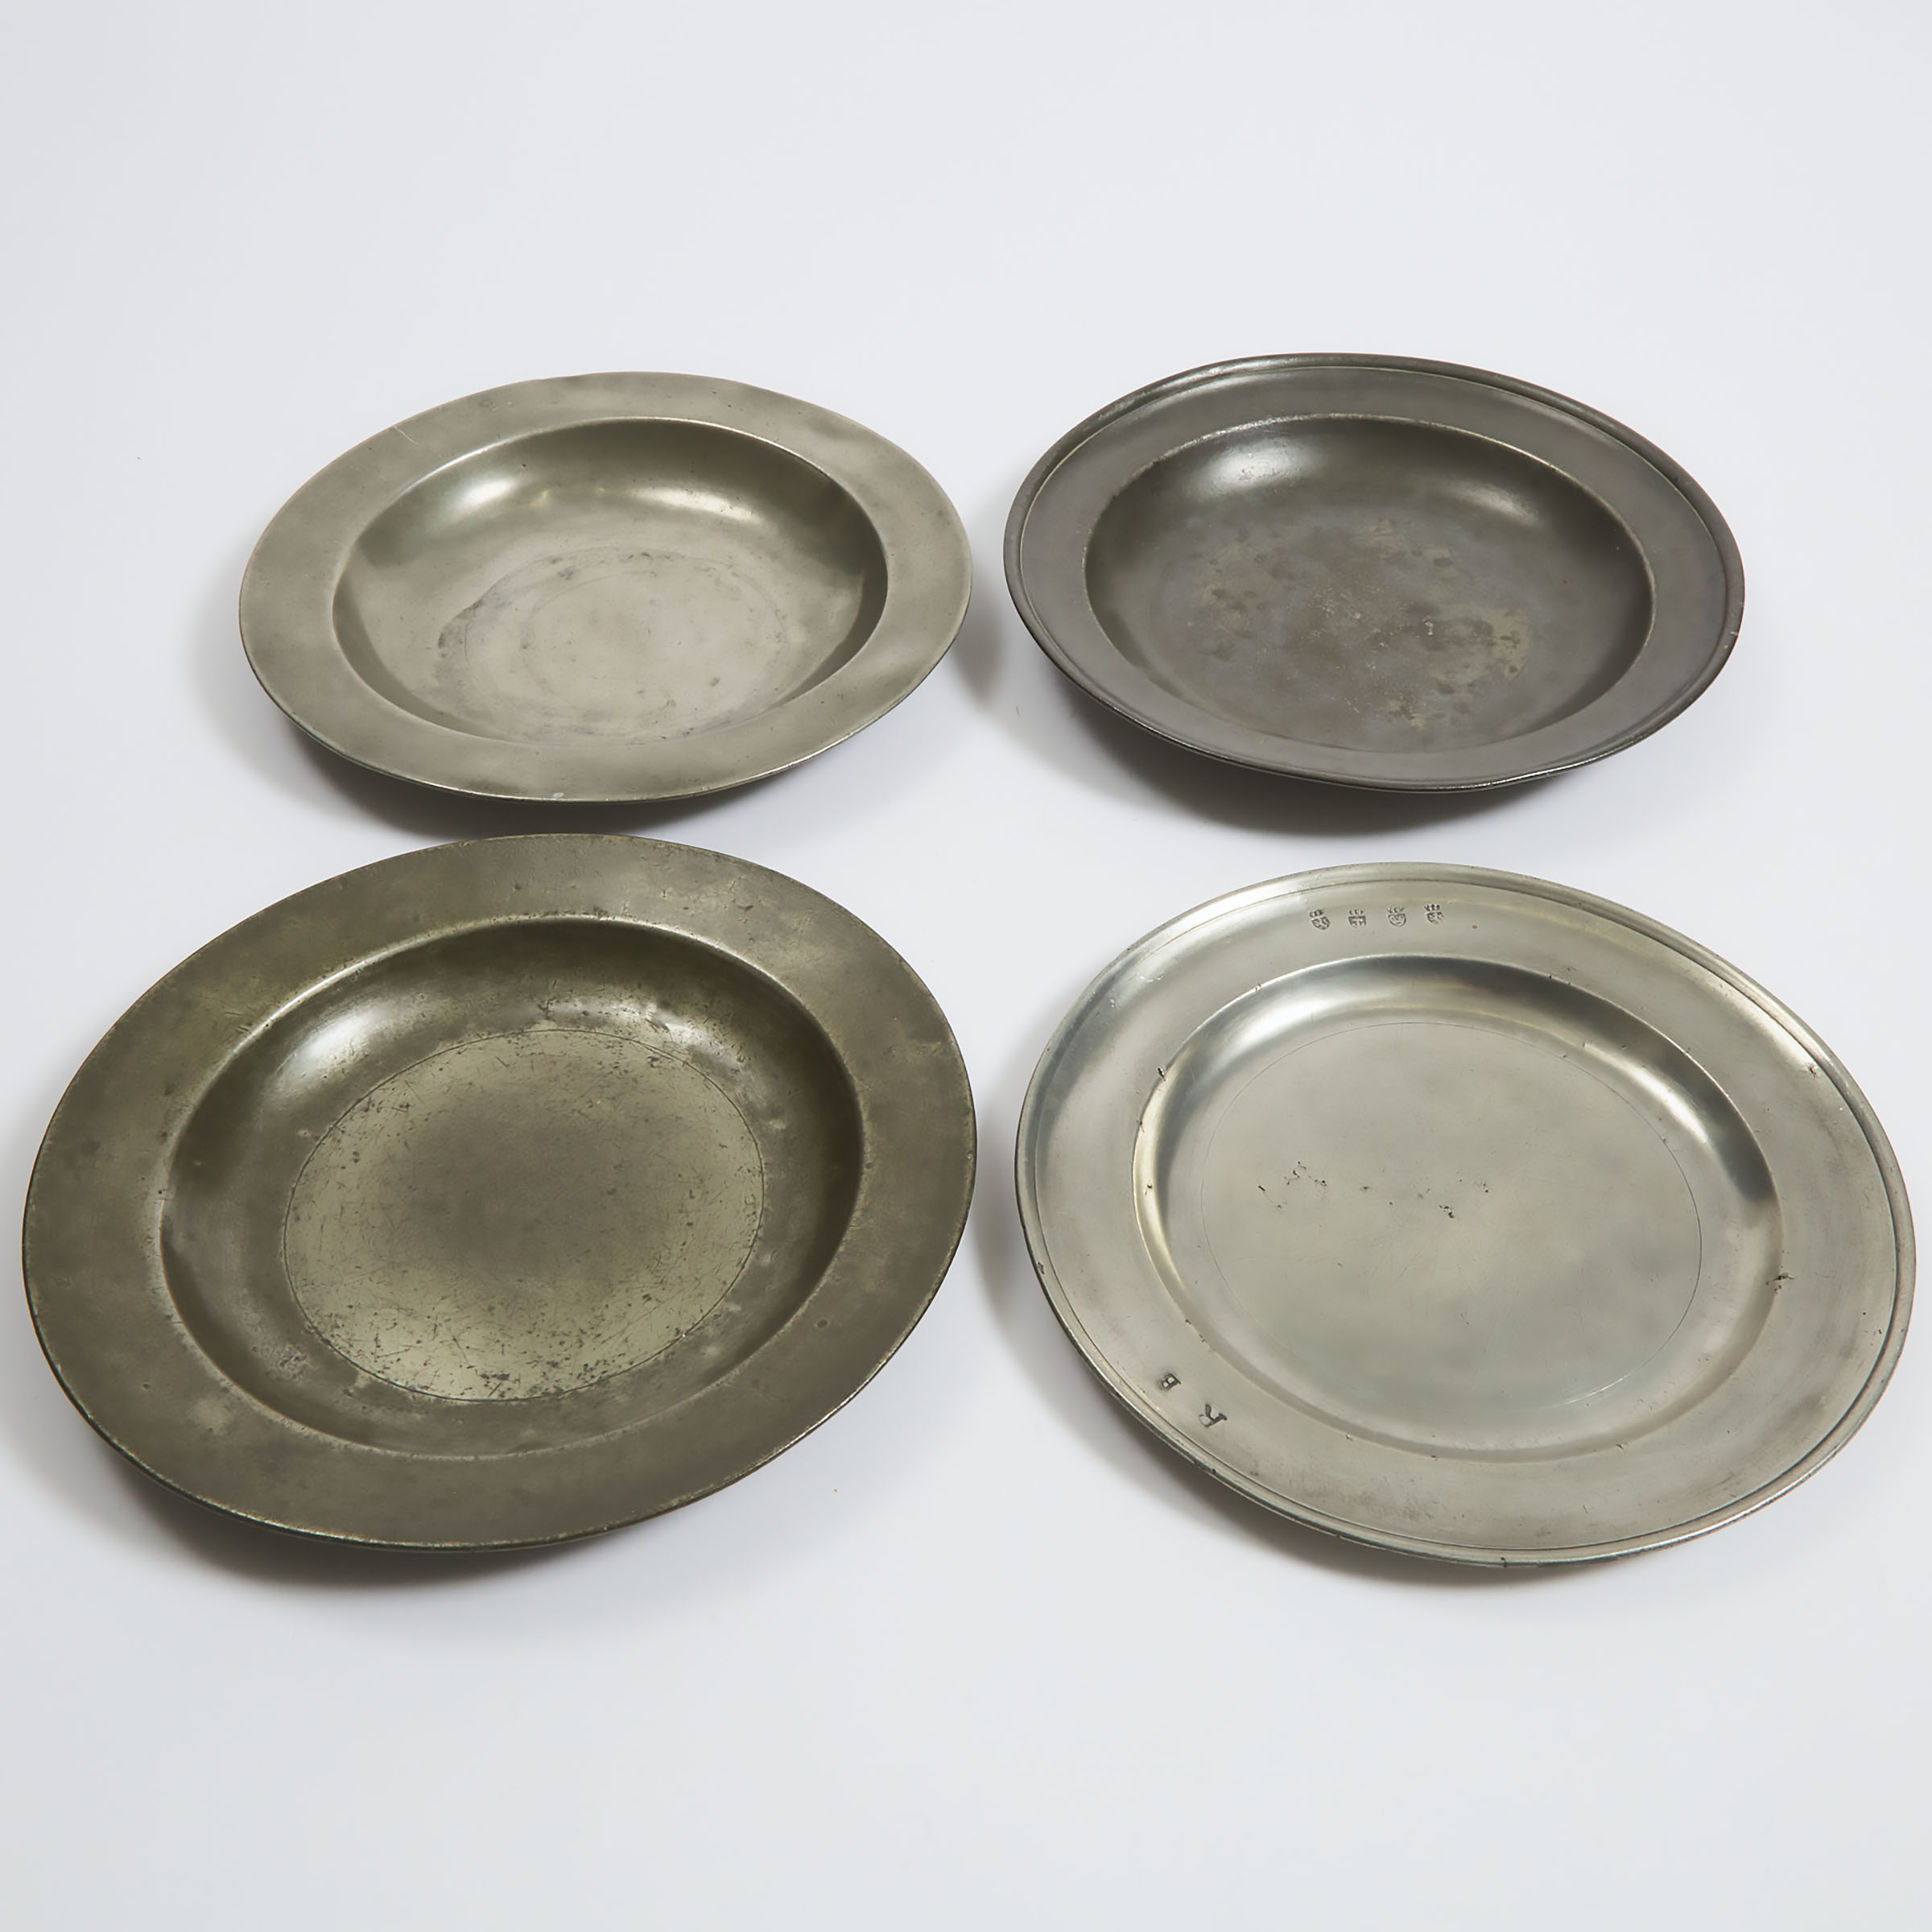 Four Early English Pewter Plates, 17th and early 18th centuries